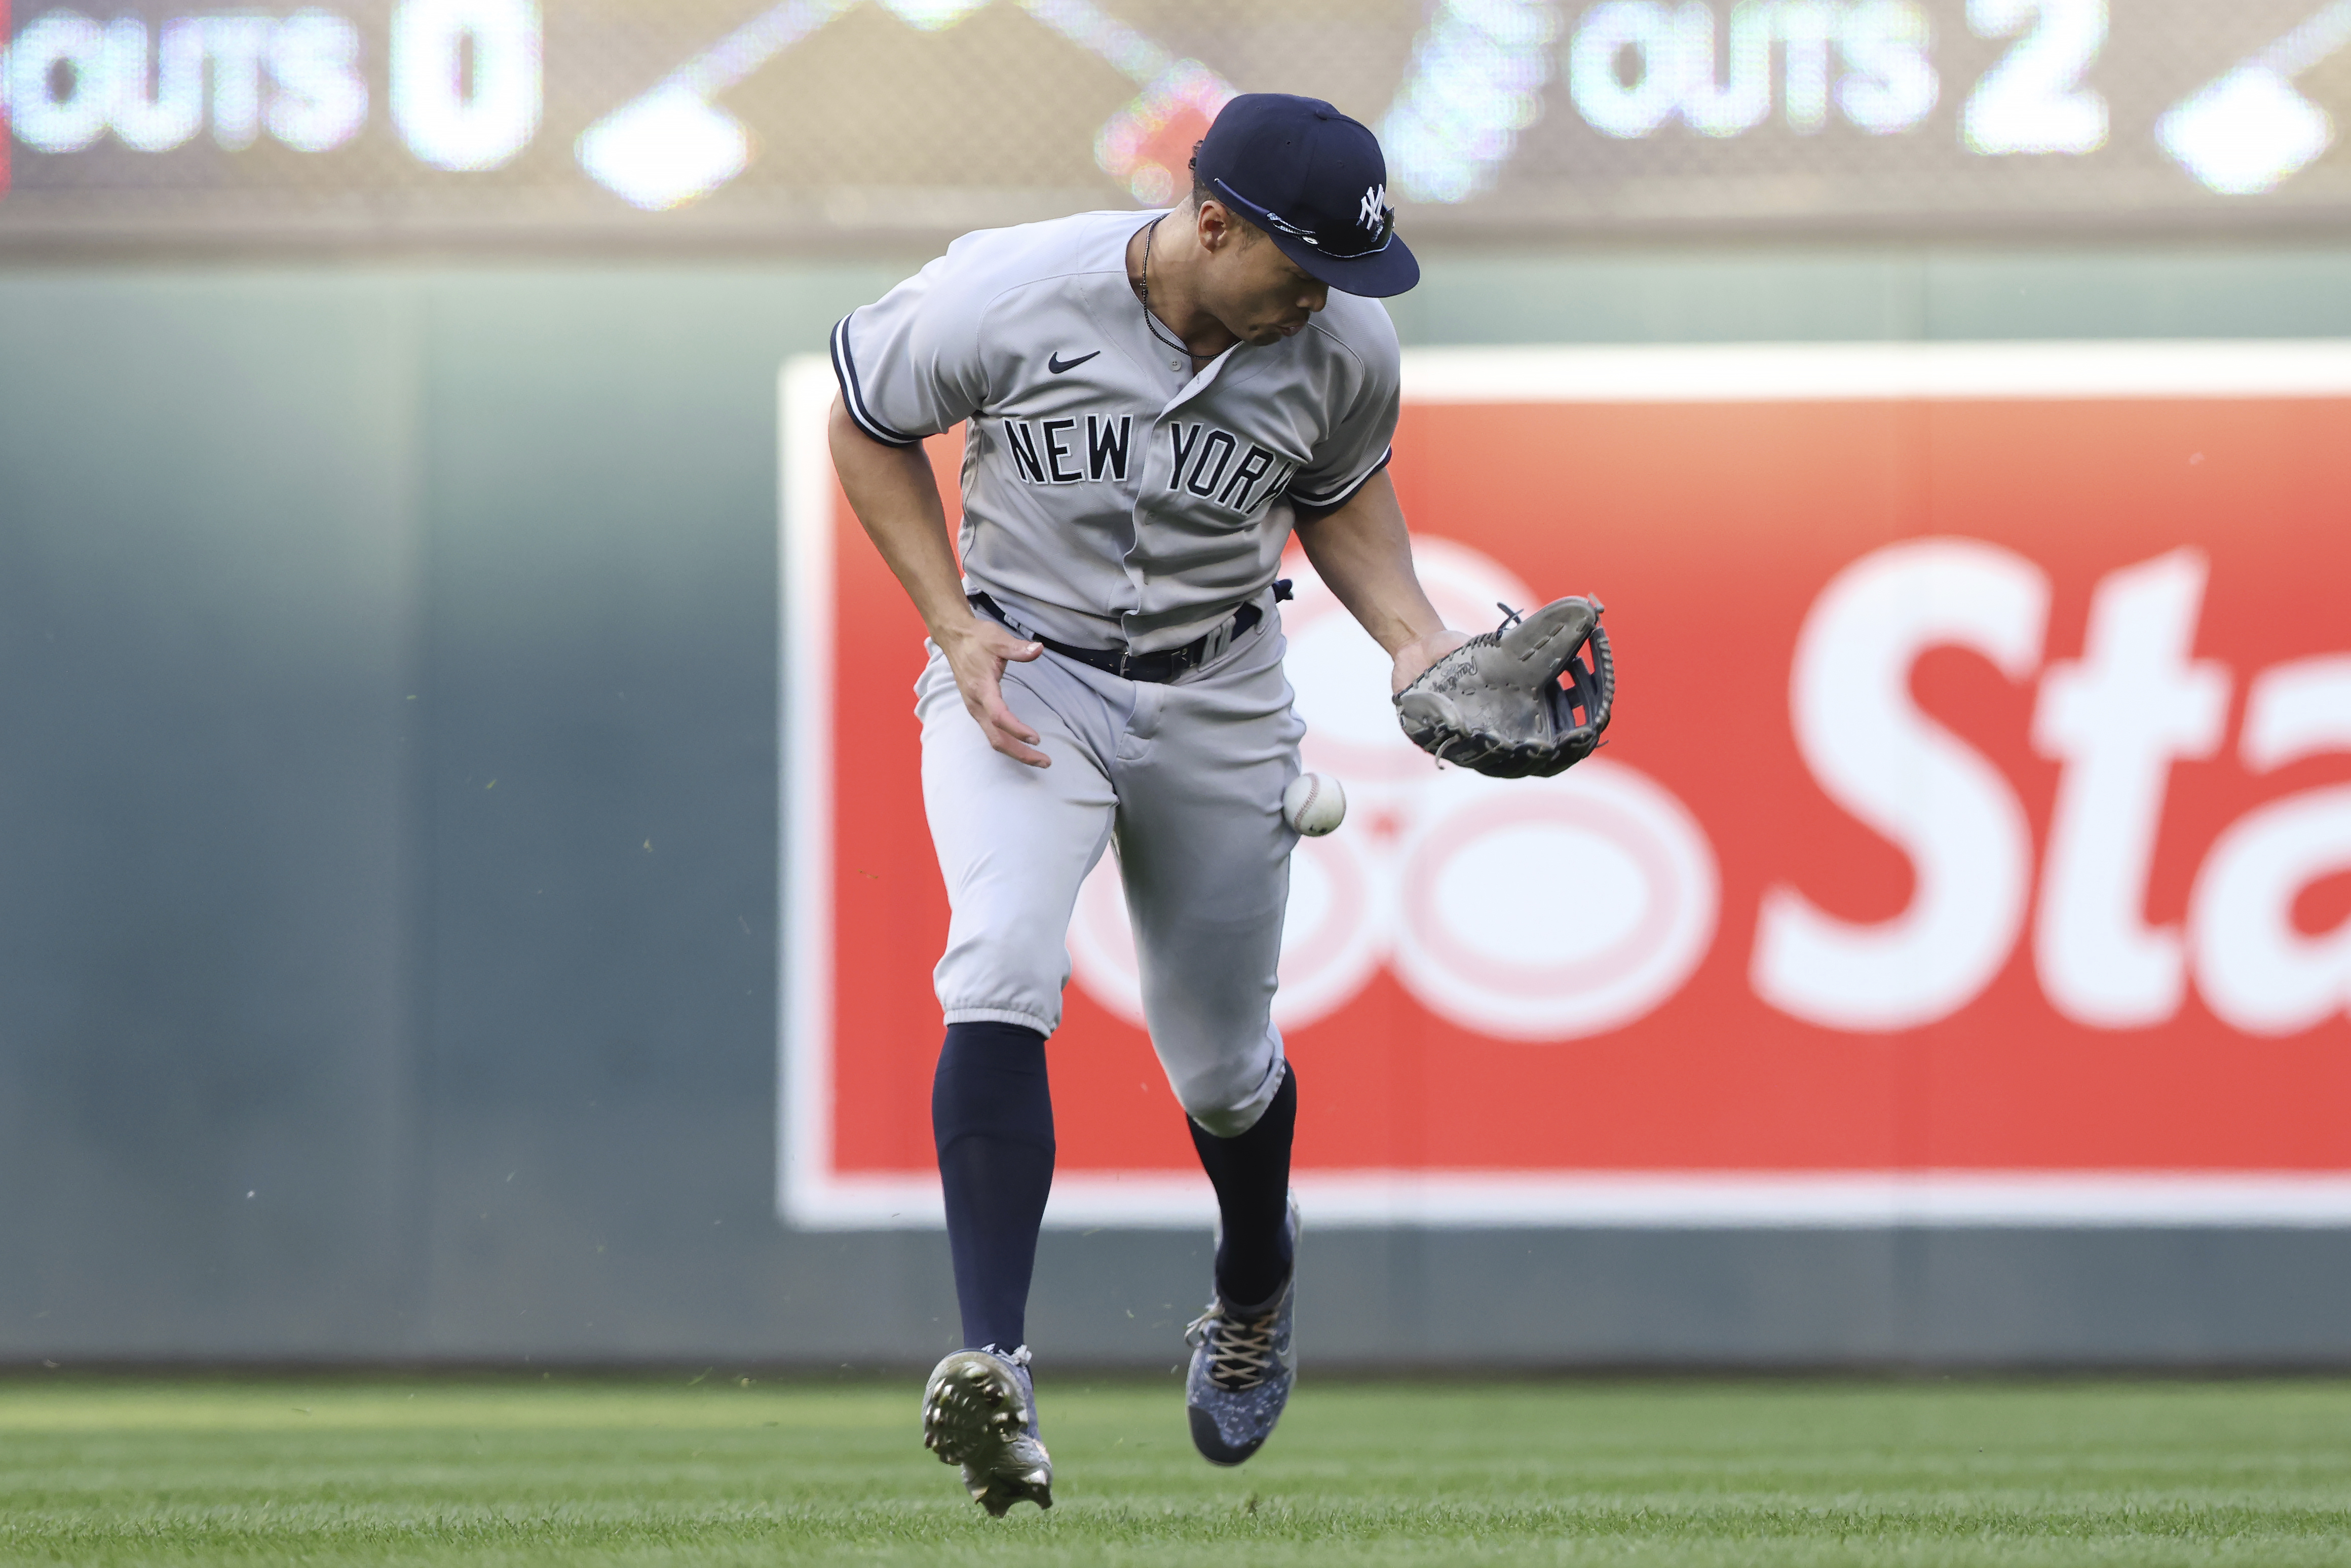 Yankees DH Giancarlo Stanton deserves a shot in left field